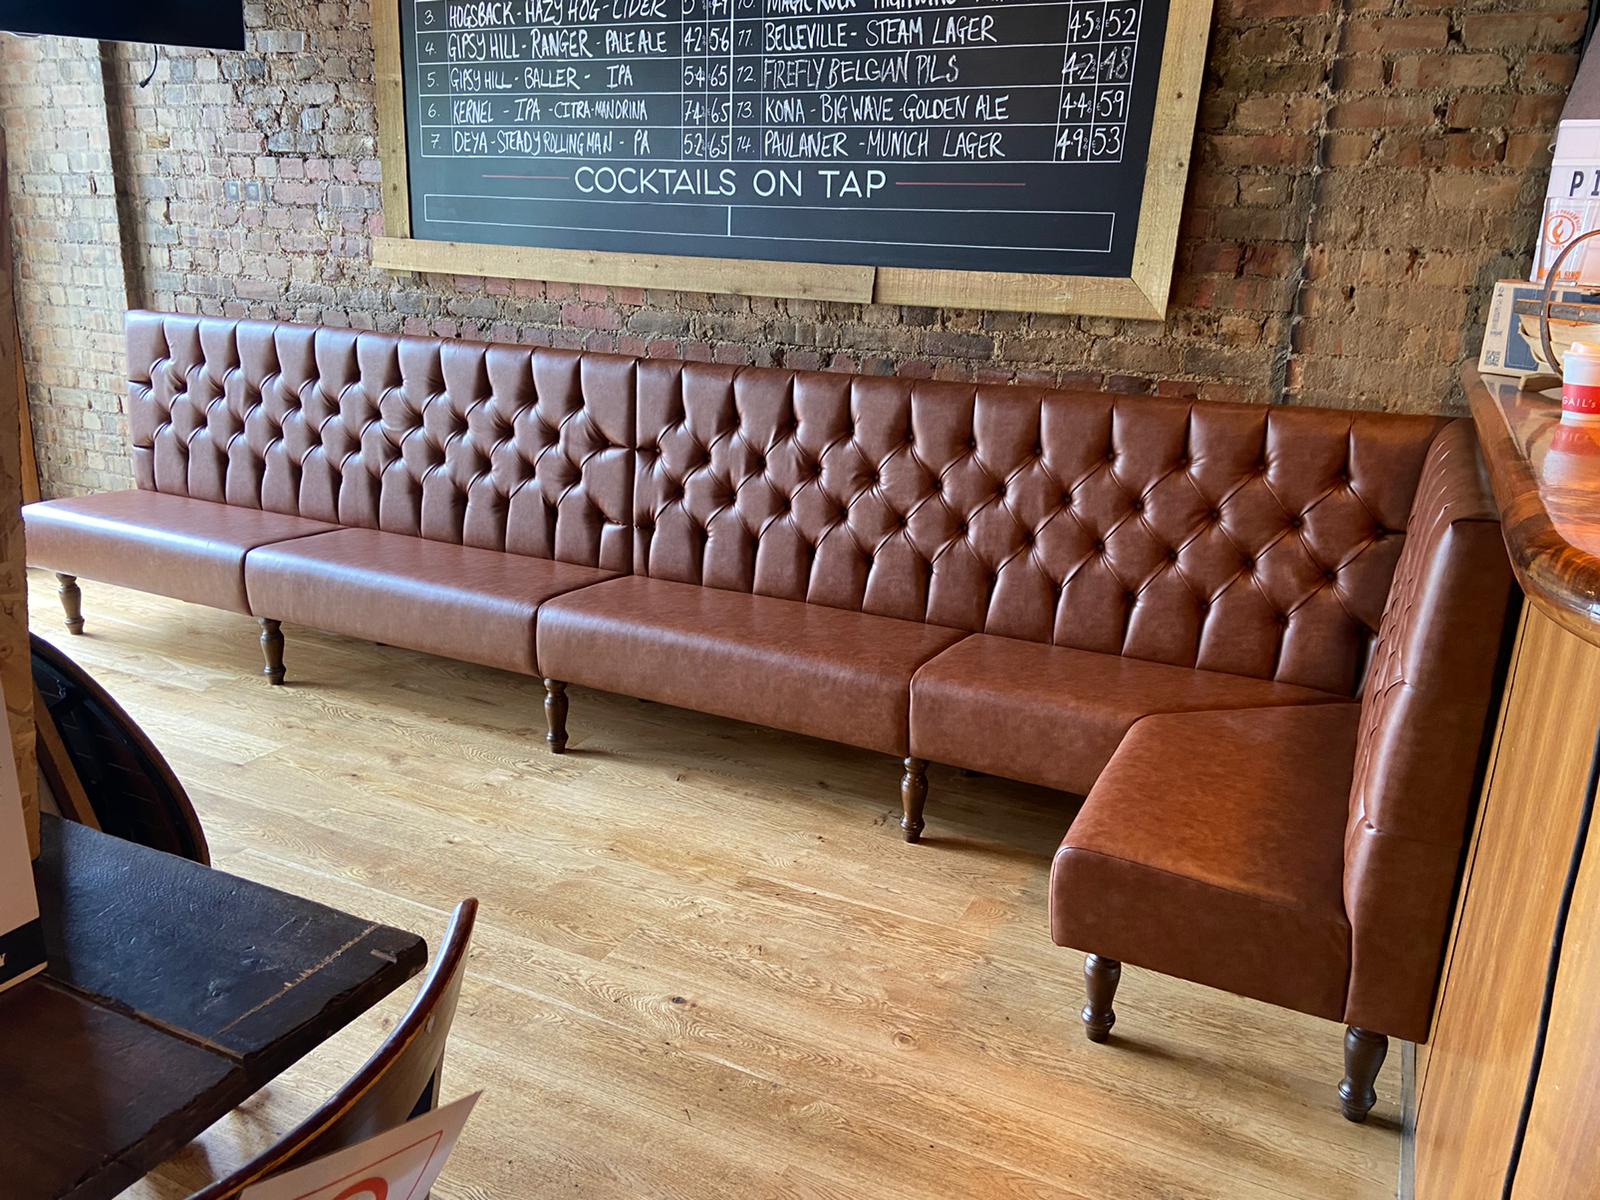 Deep buttoned seating with turned legs